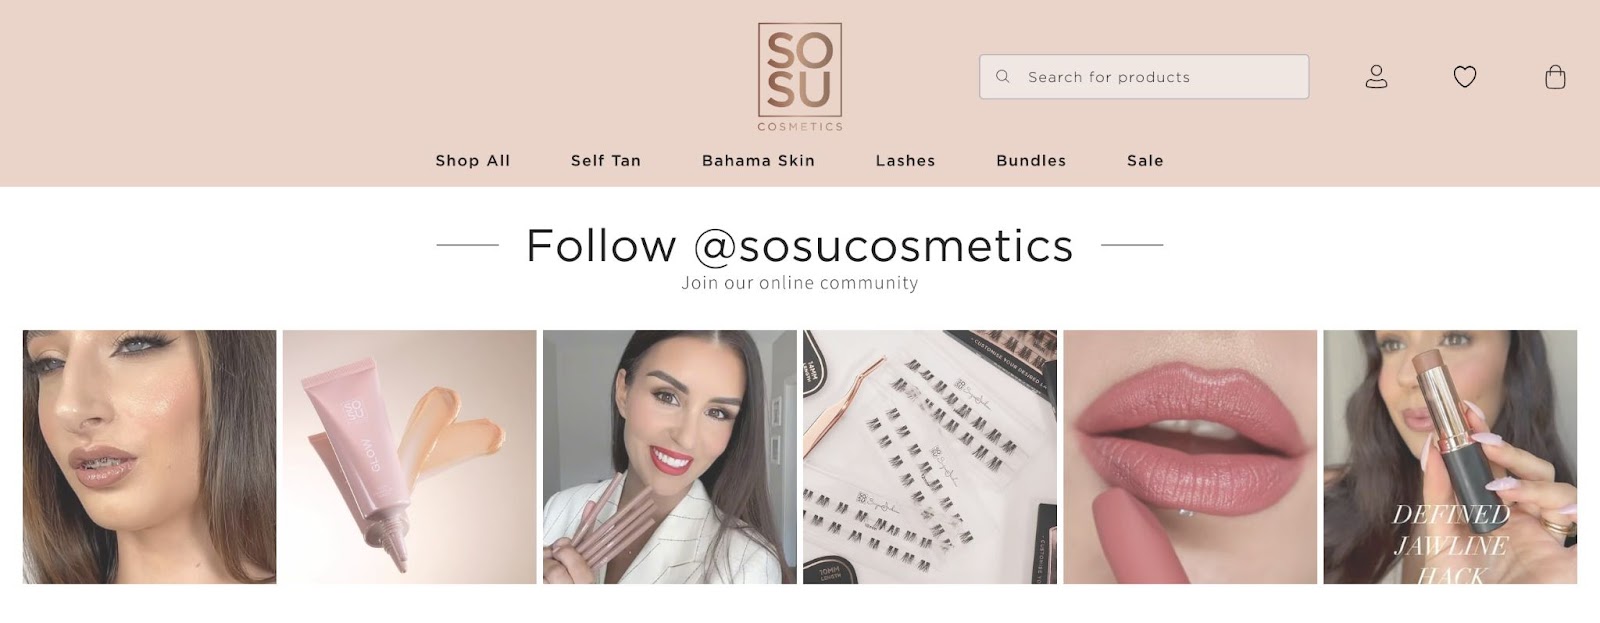 cosmetics company with user generated content for instagram such as products and using products